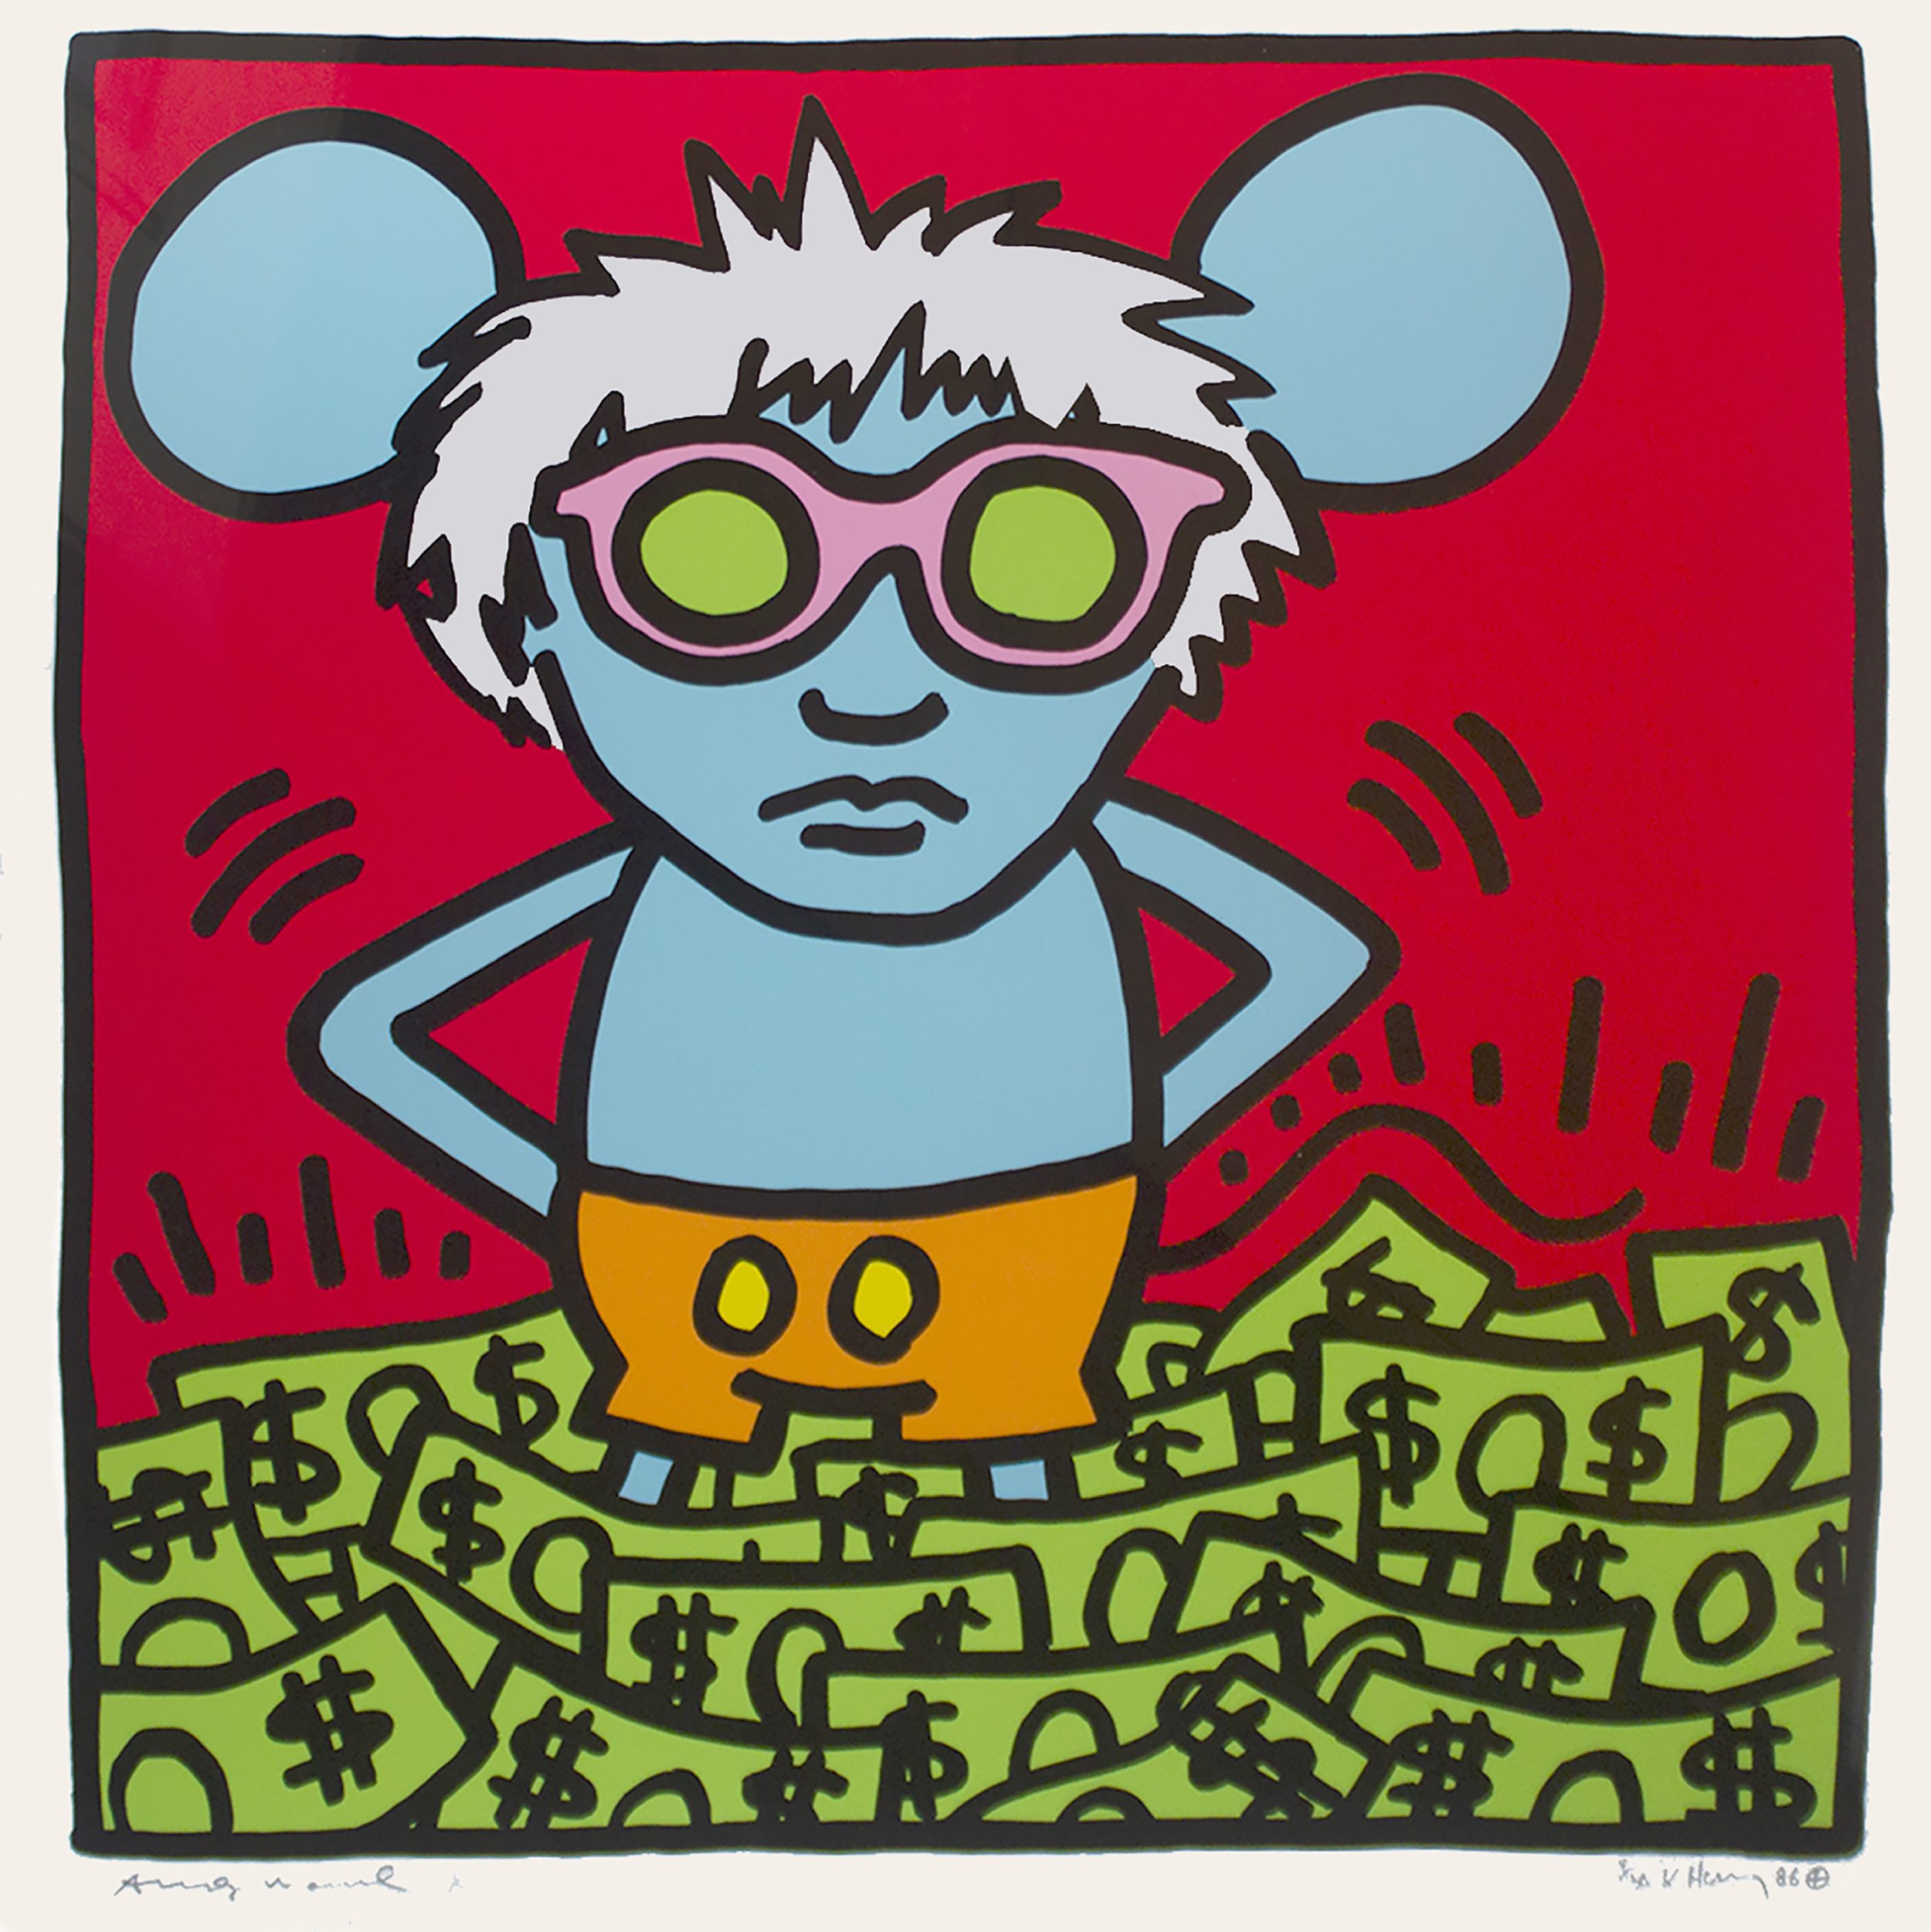  Keith Haring  (1958-1990)  Andy Mouse, An Homage to Andy Warhol, 1986  Silkscreen  From the numbered edition of 30  Signed by Keith Haring &amp; Andy Warhol in pencil on recto; Numbered in pencil on recto; Printer chop mark on recto  Printed by Rupe